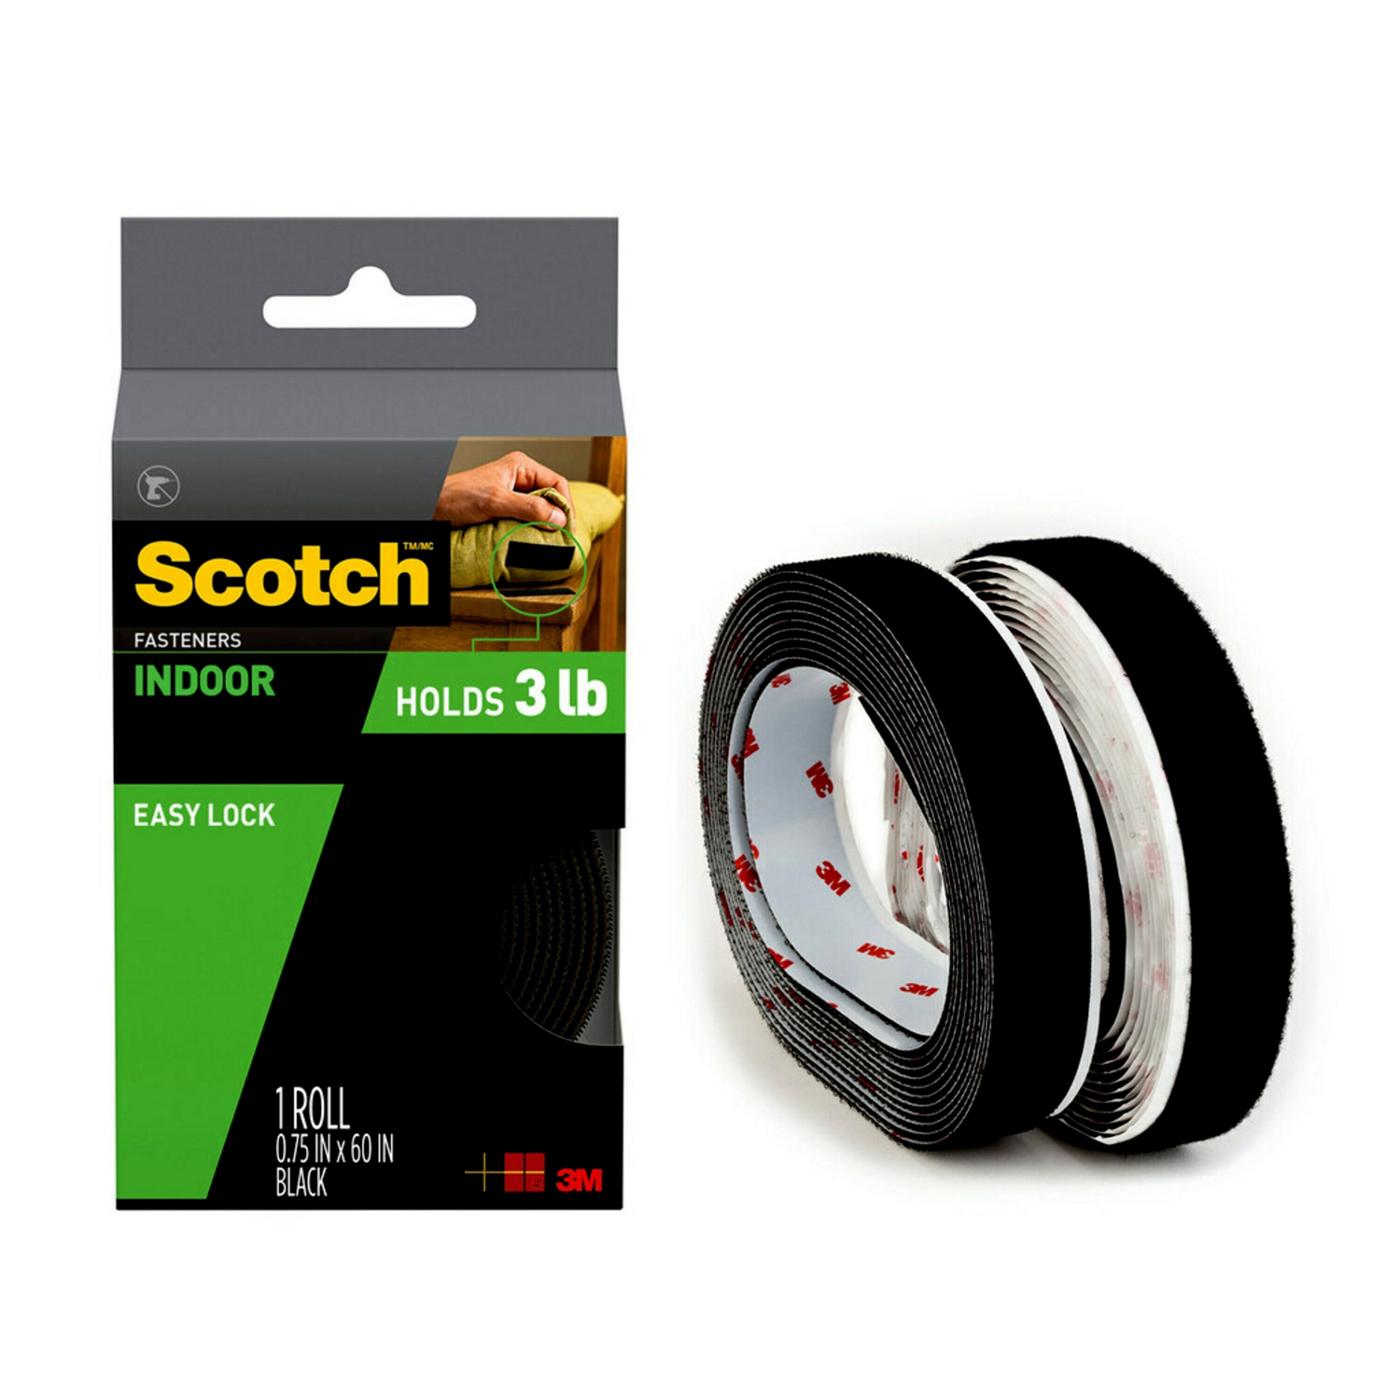 Scotch Indoor Fasteners Roll - Black; image 2 of 3